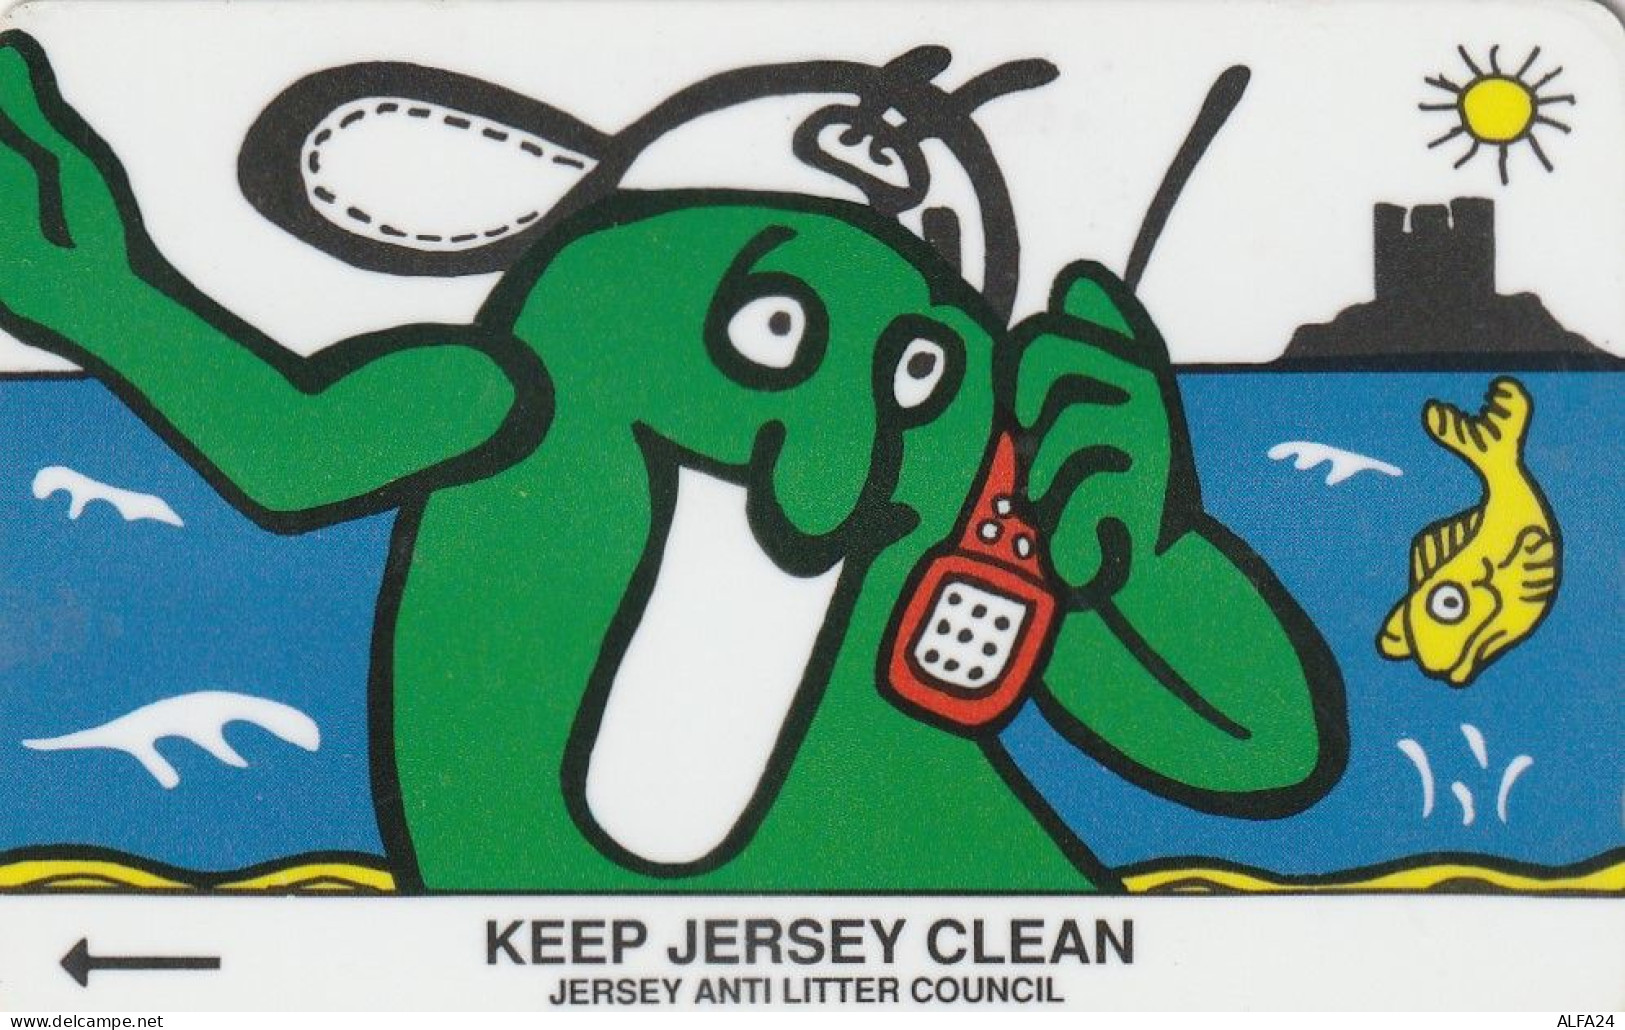 PHONE CARD JERSEY  (CZ2272 - [ 7] Jersey And Guernsey